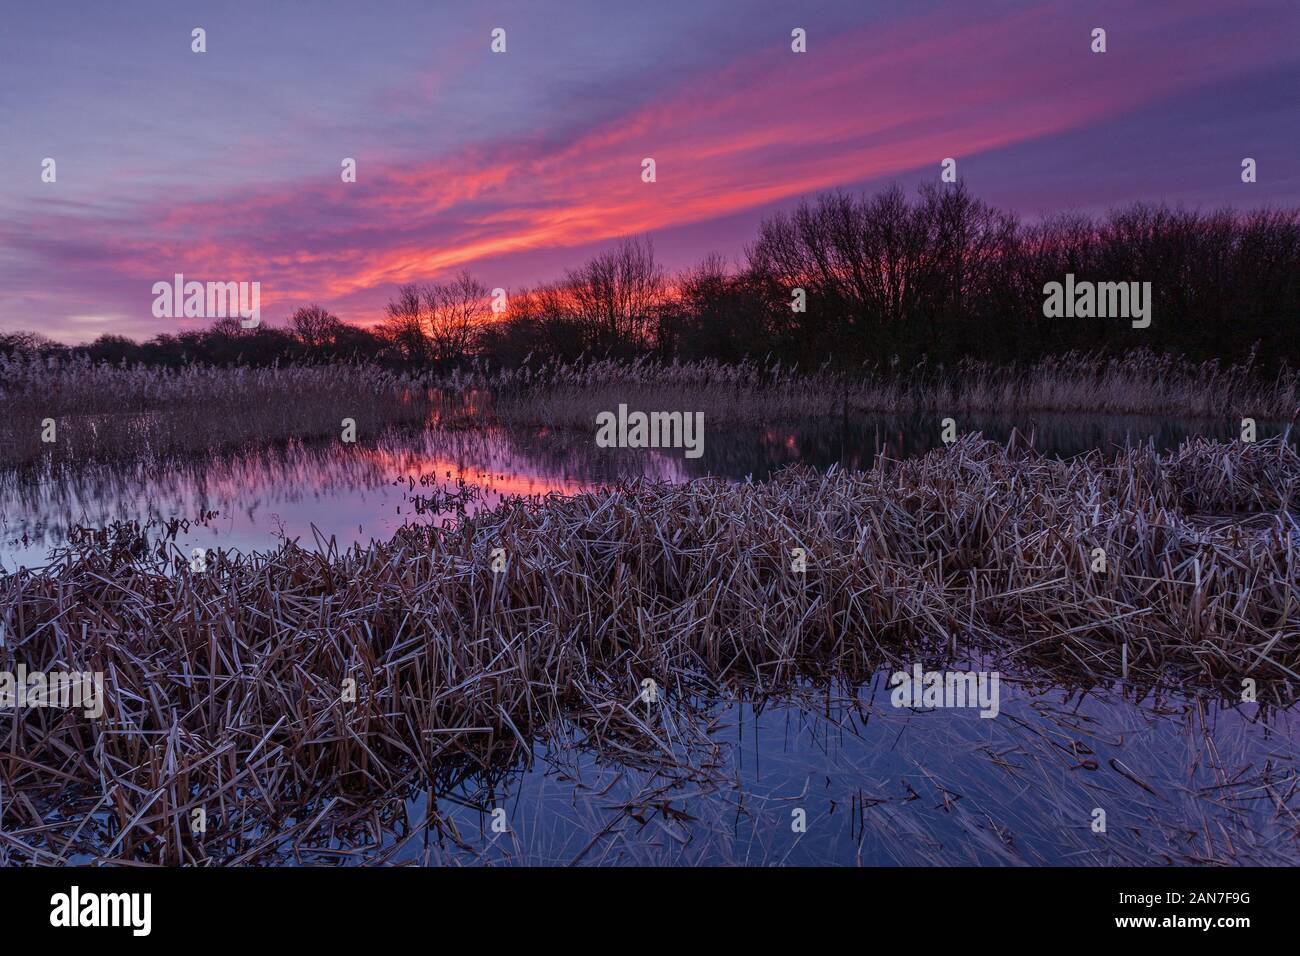 Barton-upon-Humber, North Lincolnshire, UK. 16th January 2020. UK Weather: Sunrise at a nature reserve on a Winter morning. Credit: LEE BEEL/Alamy Live News. Stock Photo